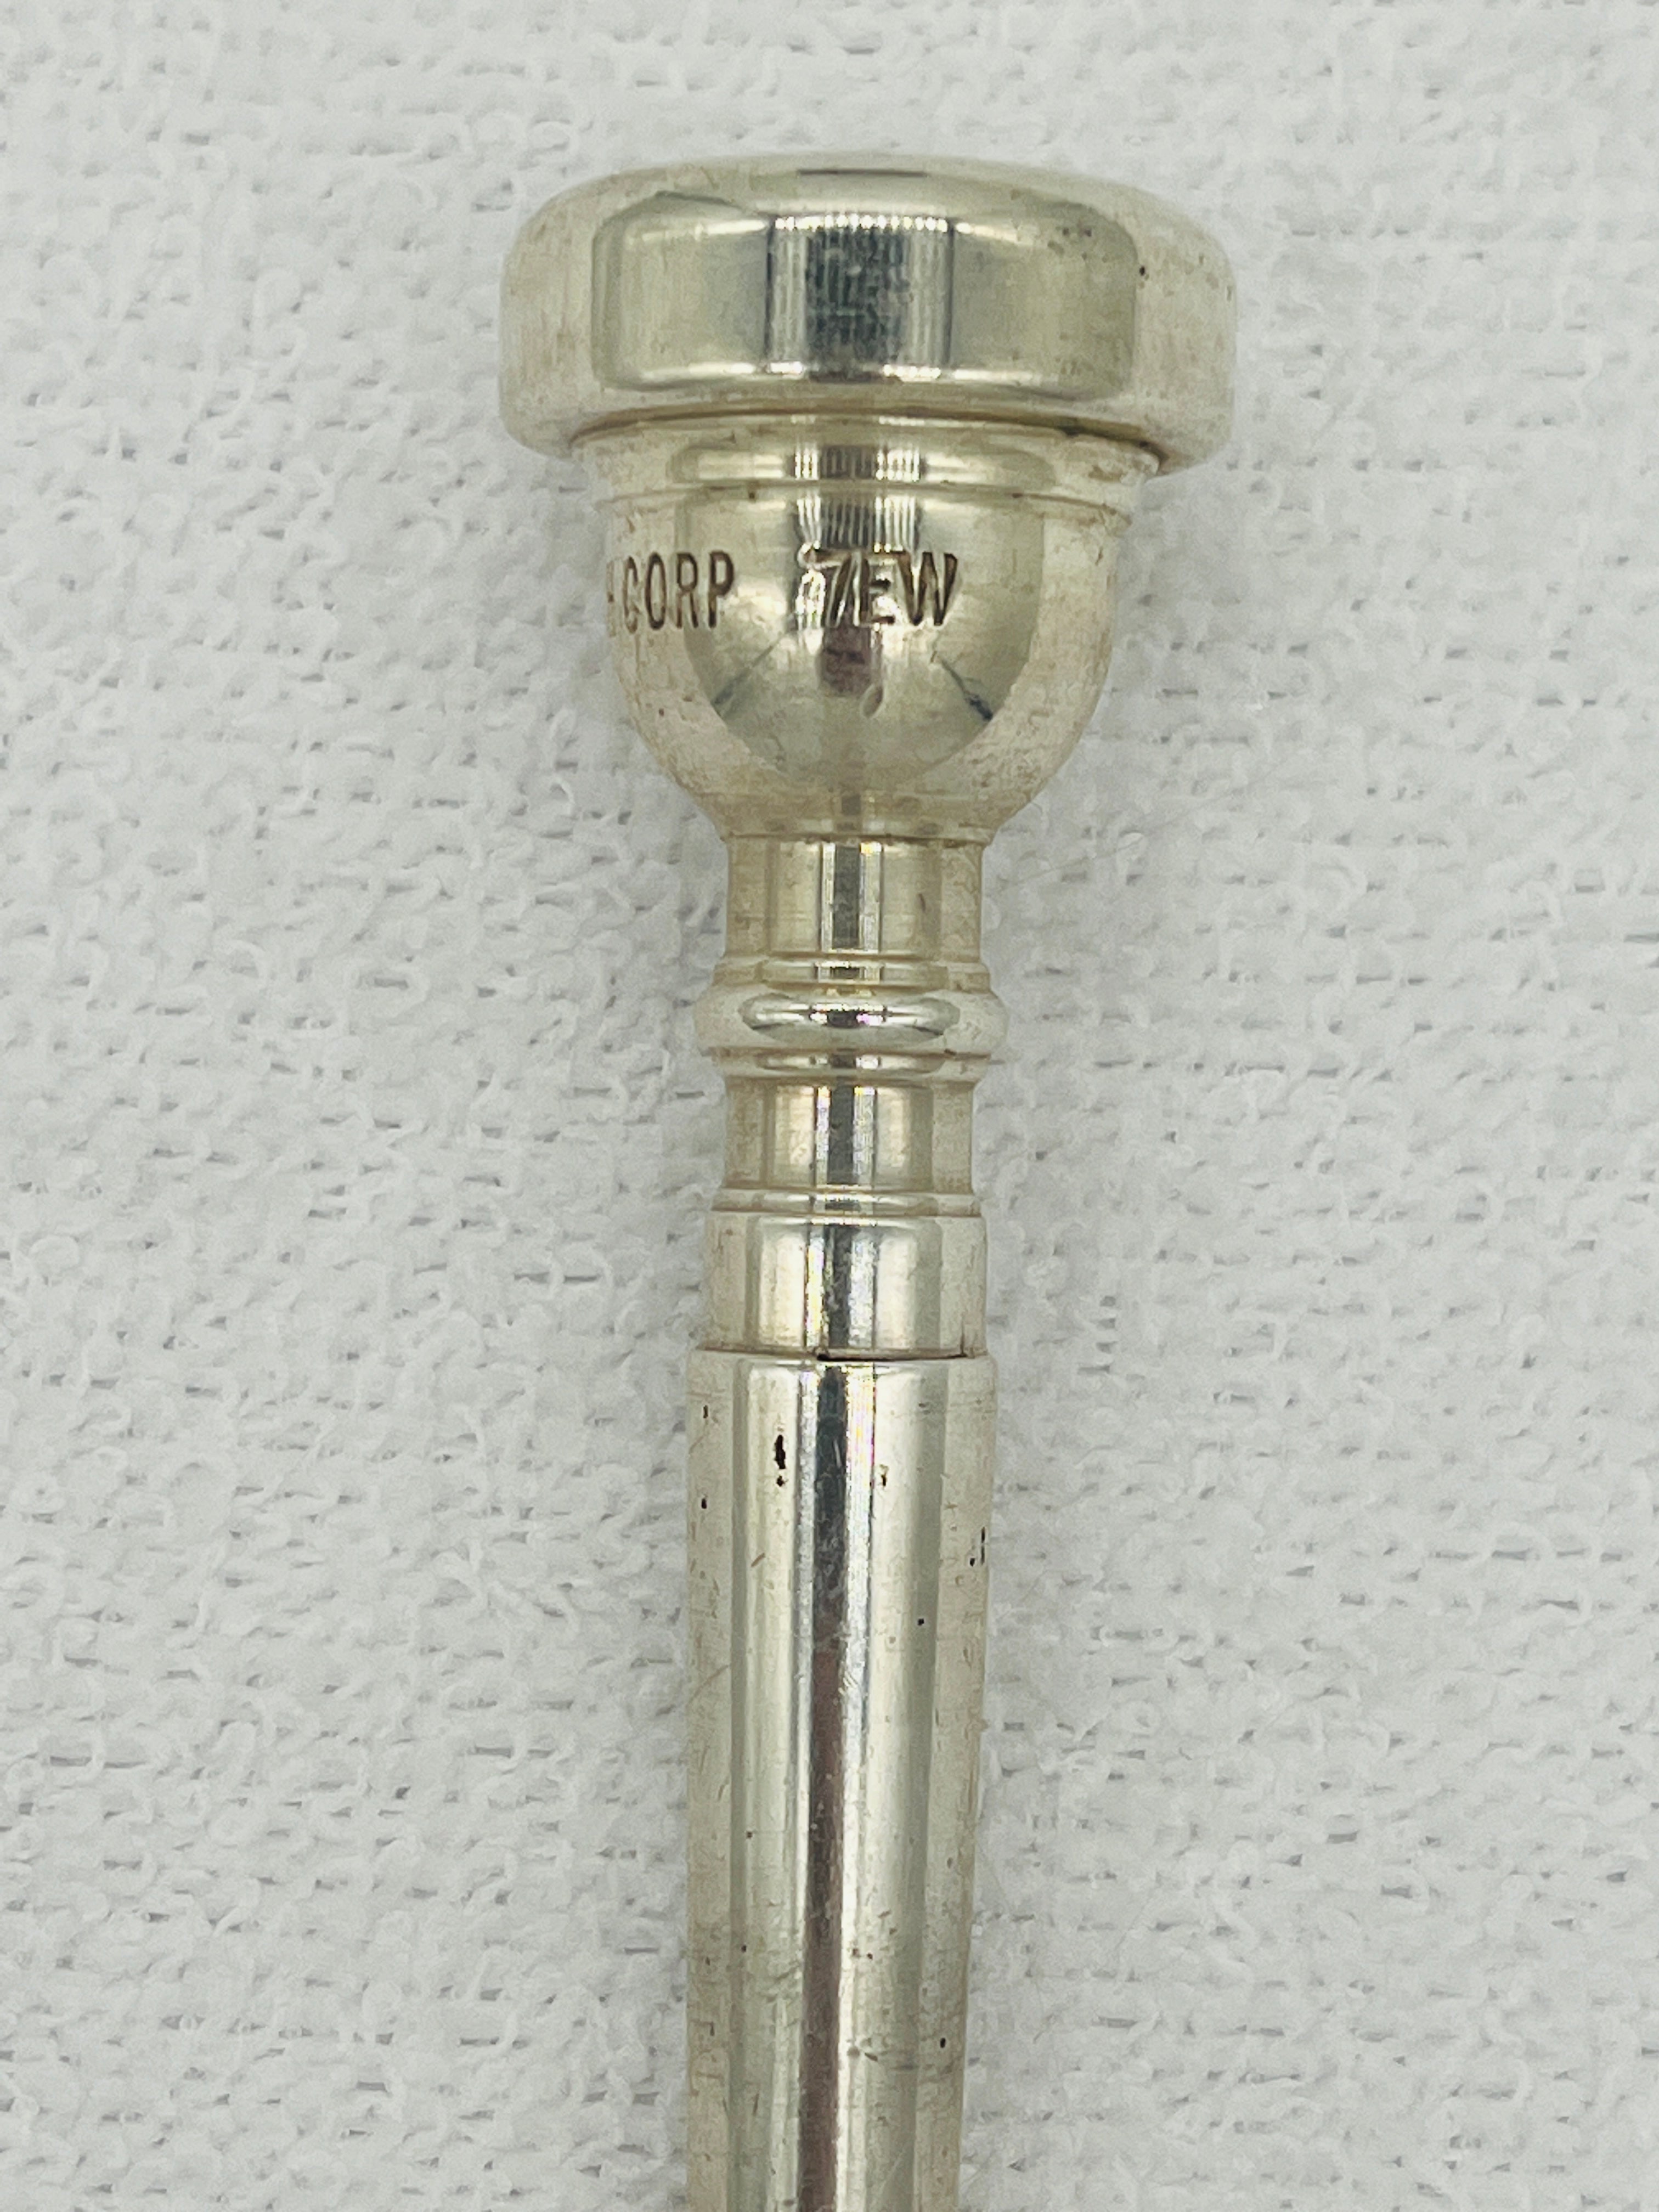 Vincent BACH Corp. 7 Trumpet Mouthpiece USED!